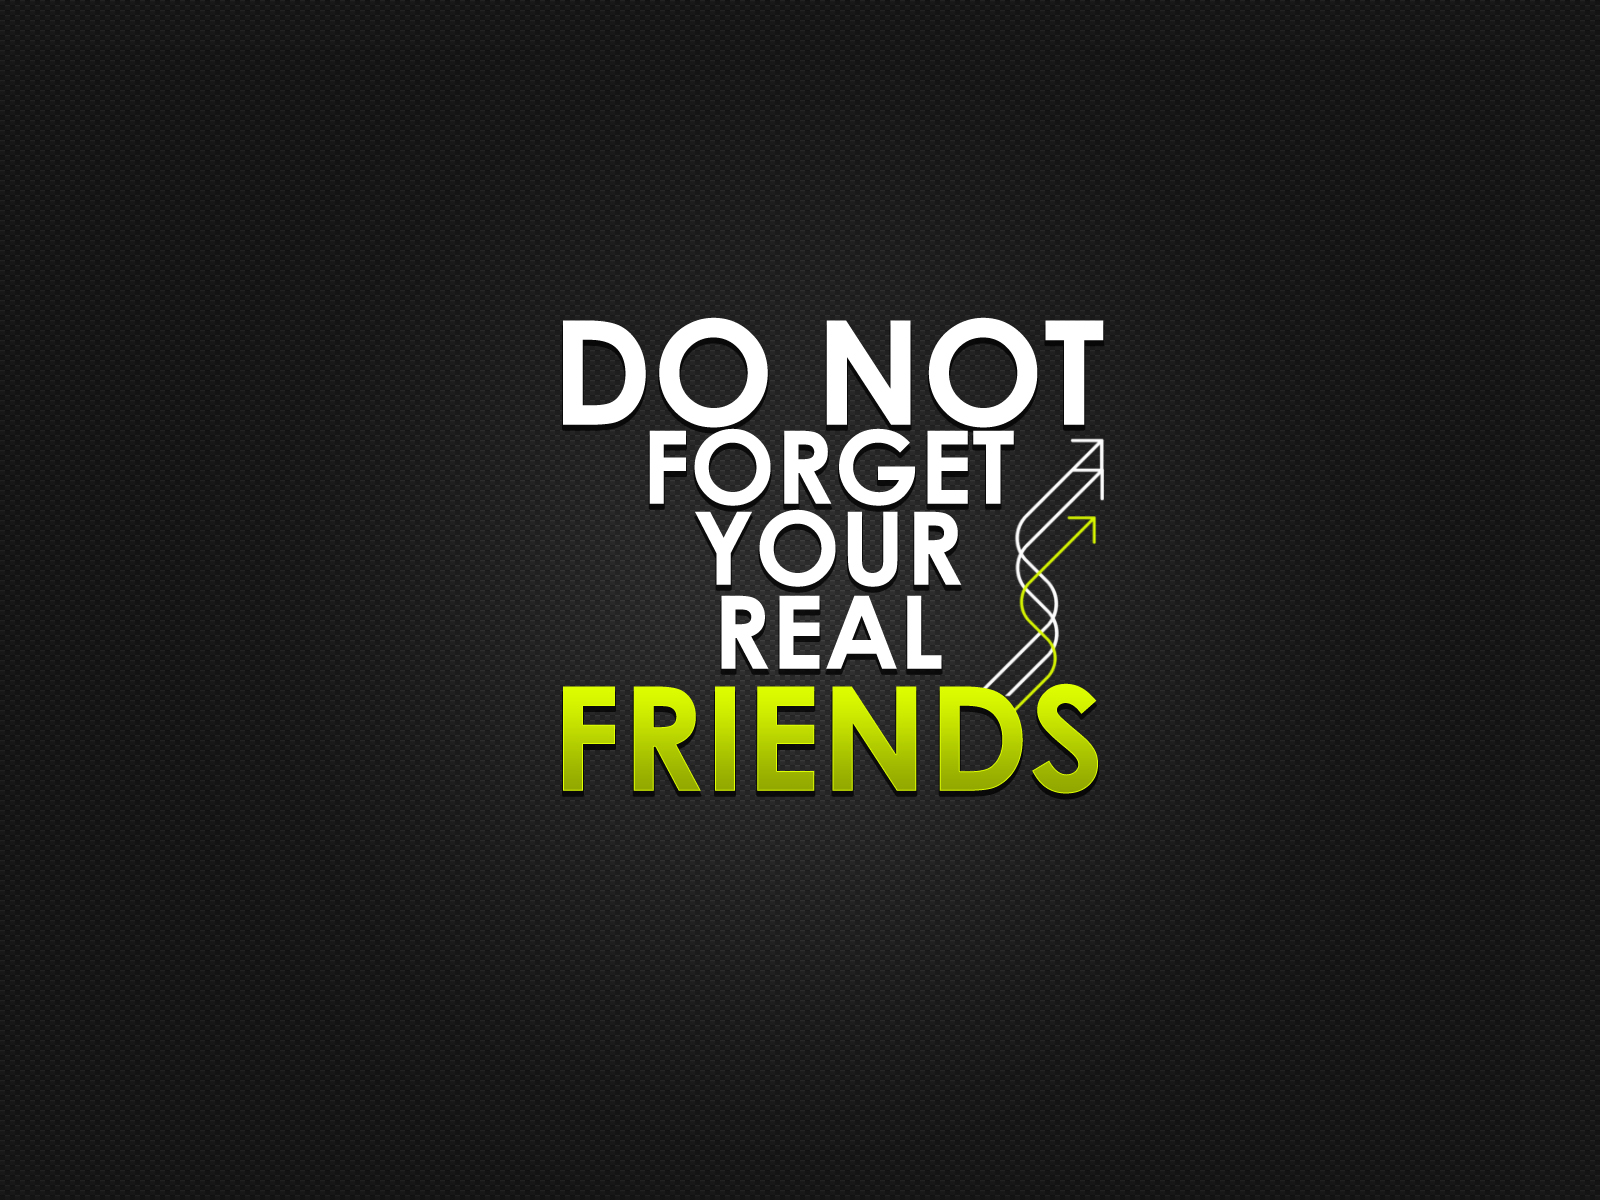 Do NOT forget your friends